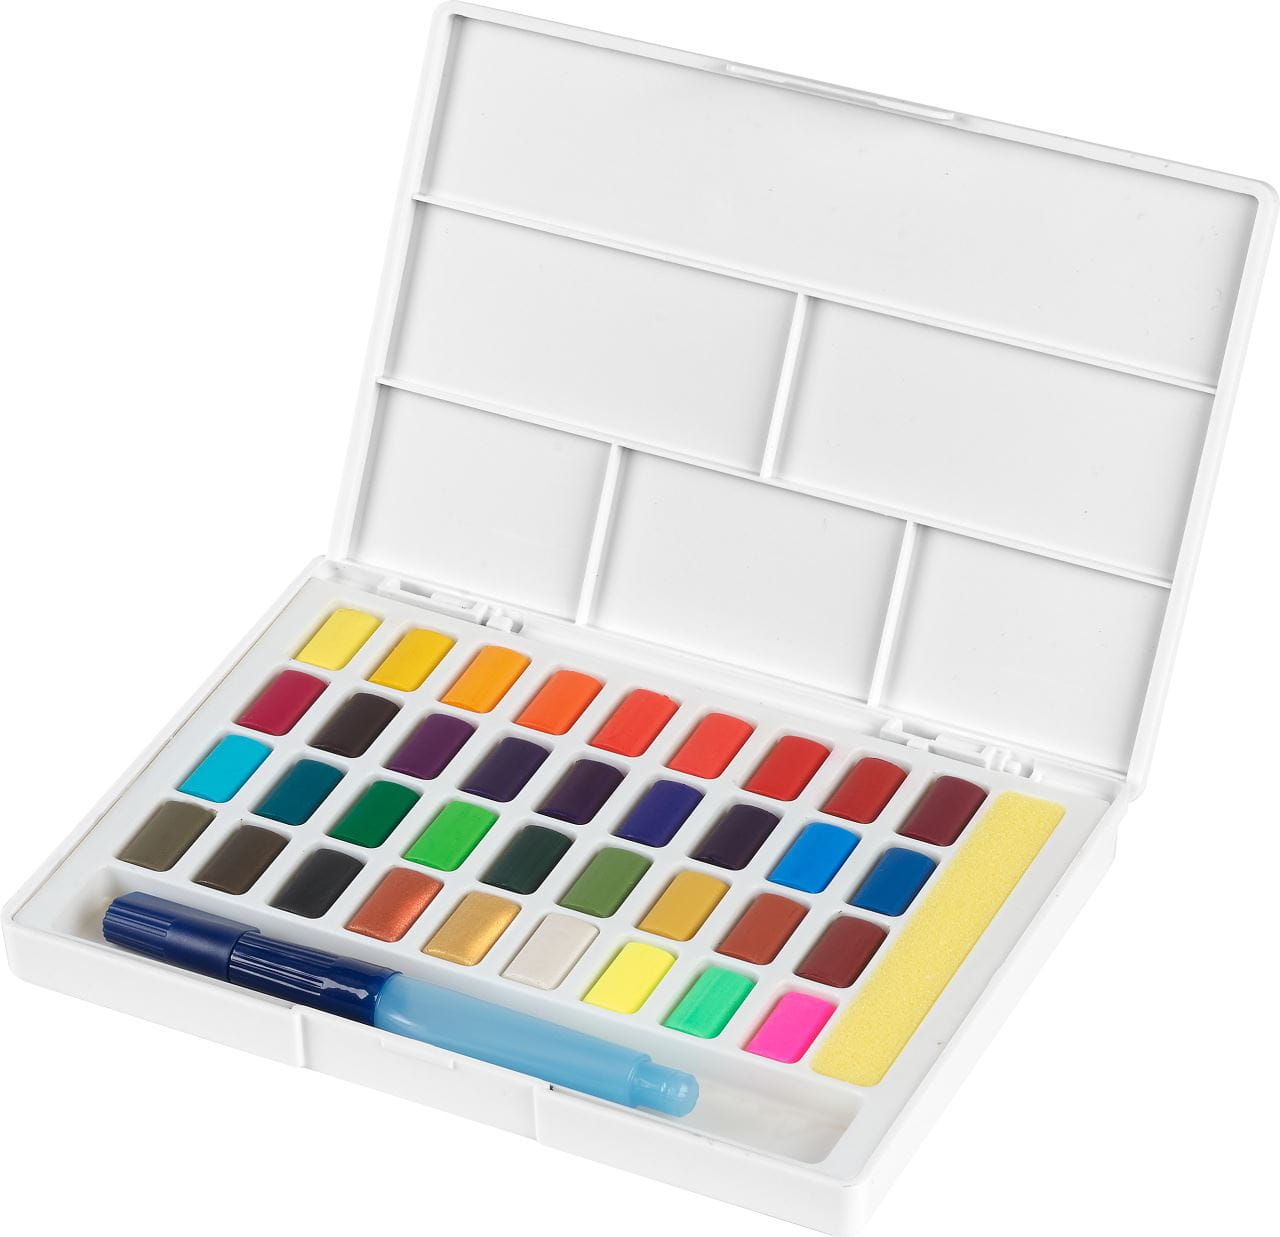 Faber-Castell - Watercolours in pans 36ct set